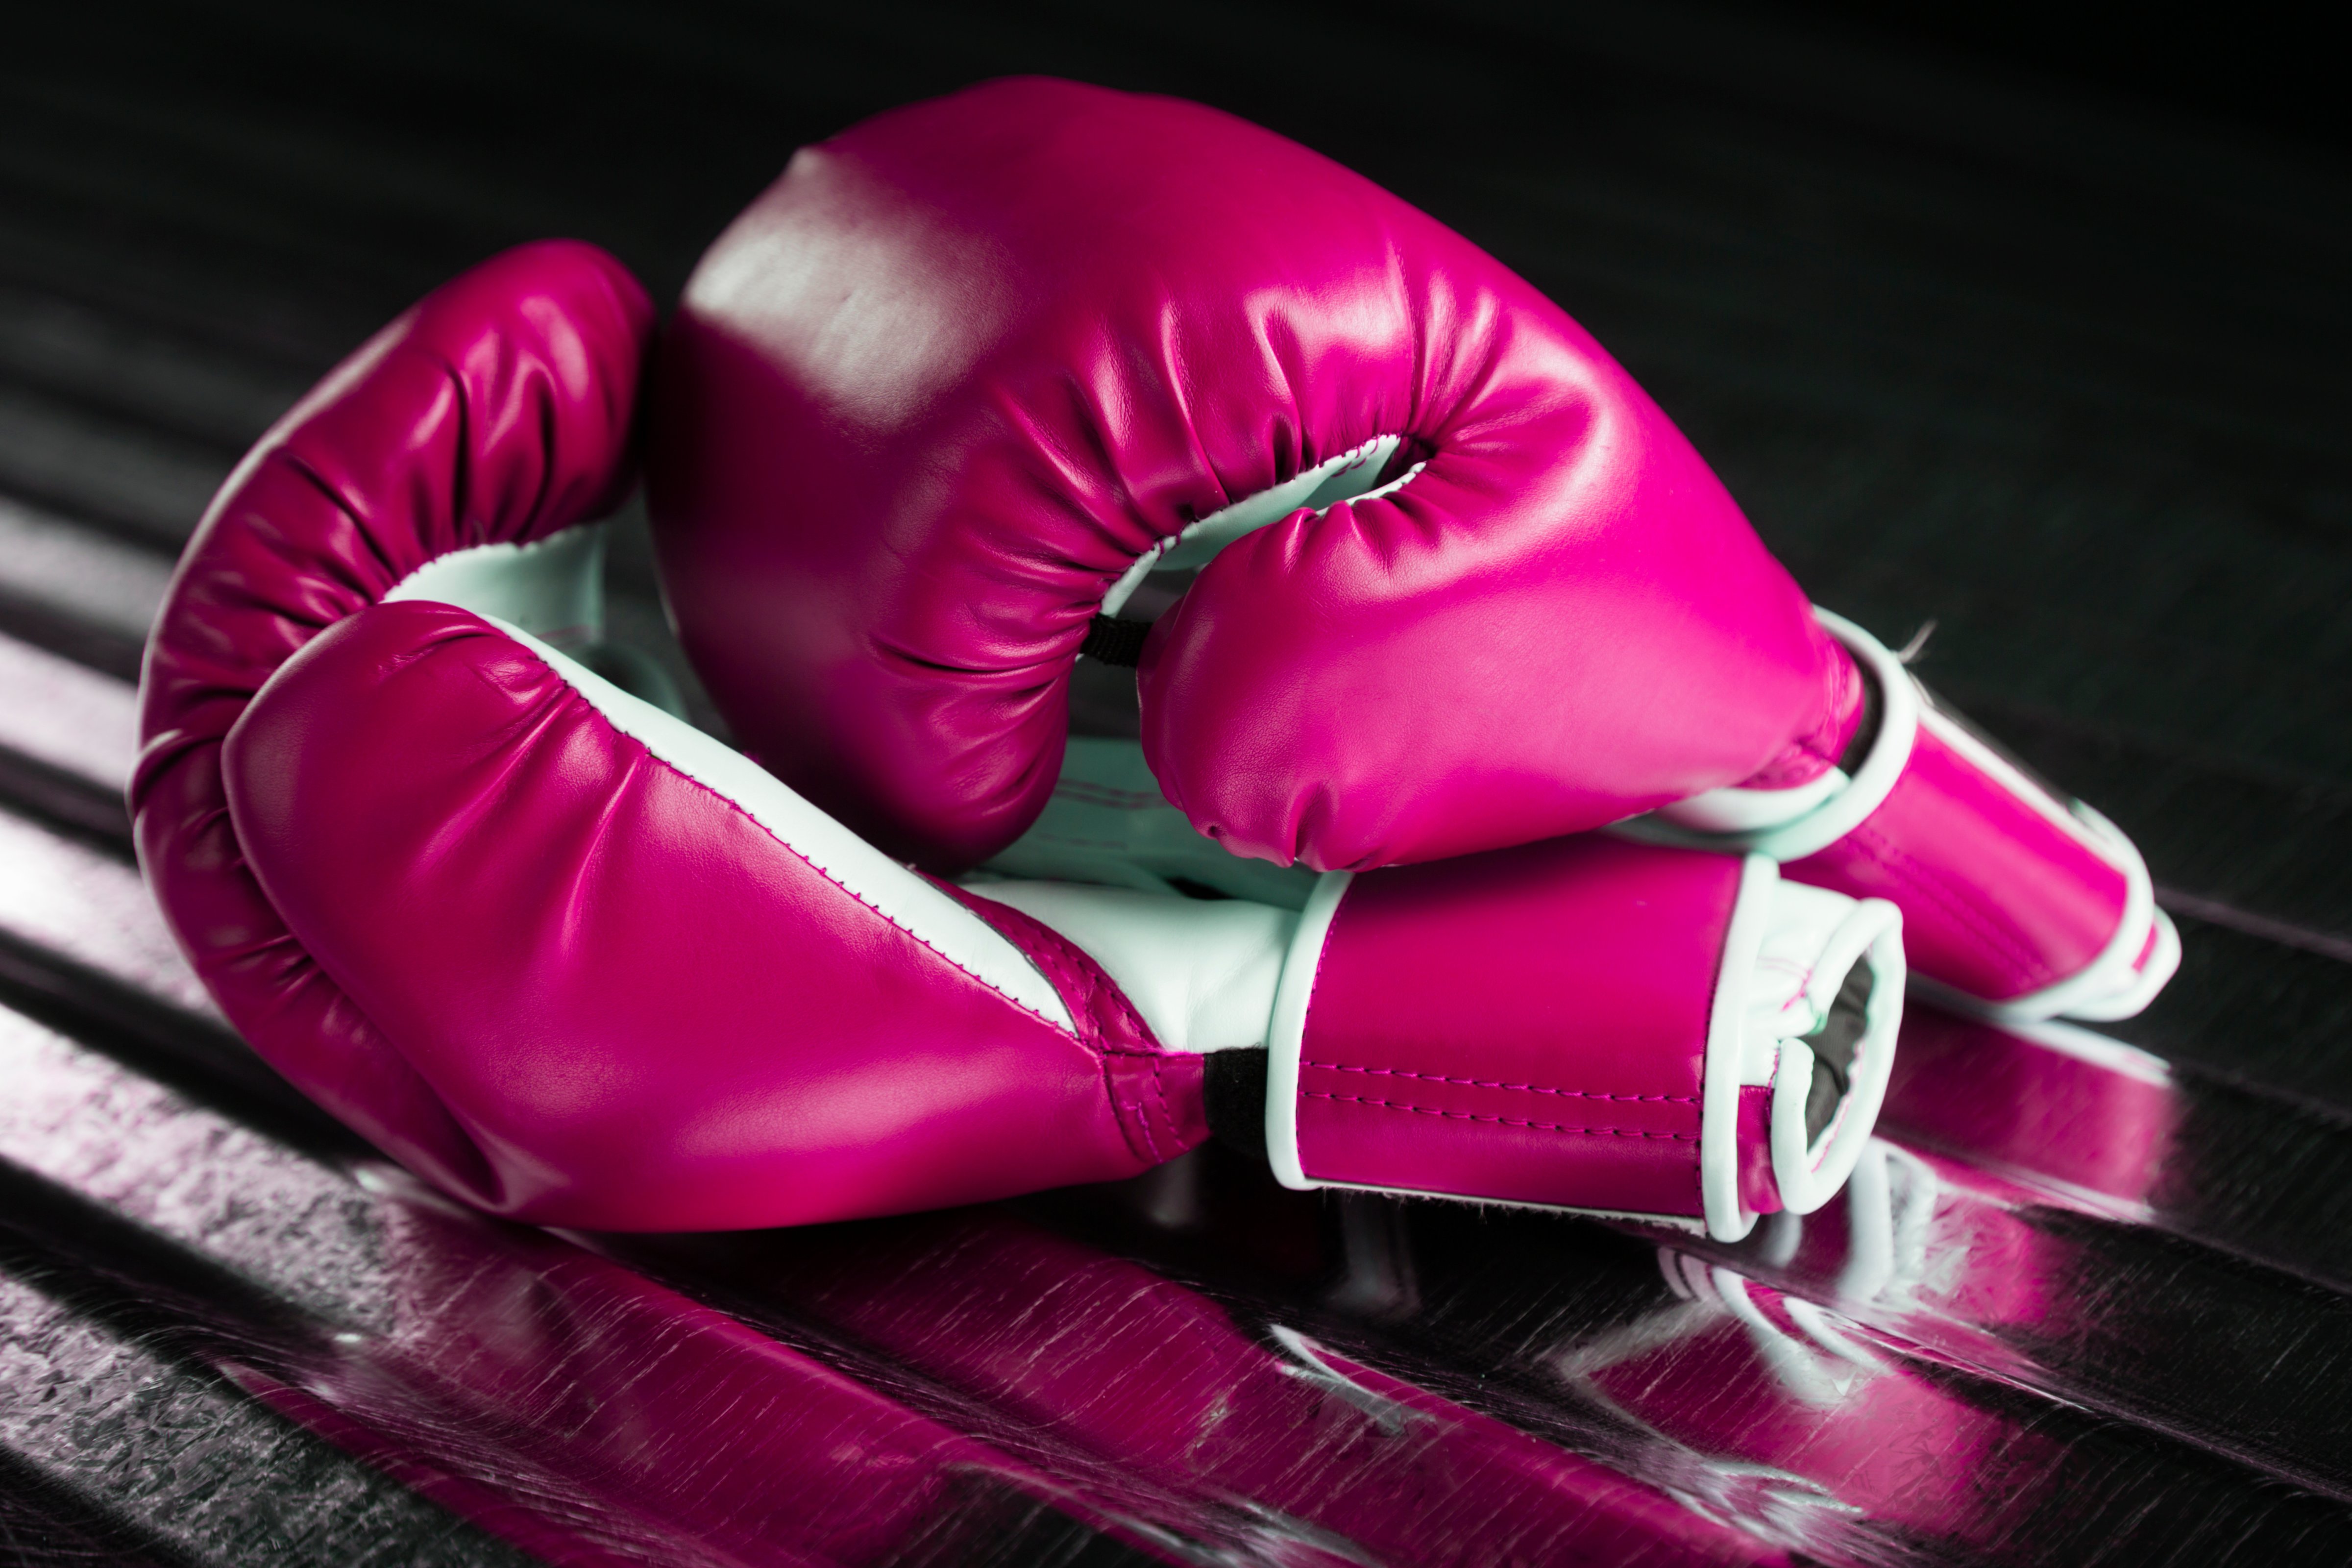 A pair of pink boxing gloves on a metallic background. (RichLegg—Getty Images/iStockphoto)